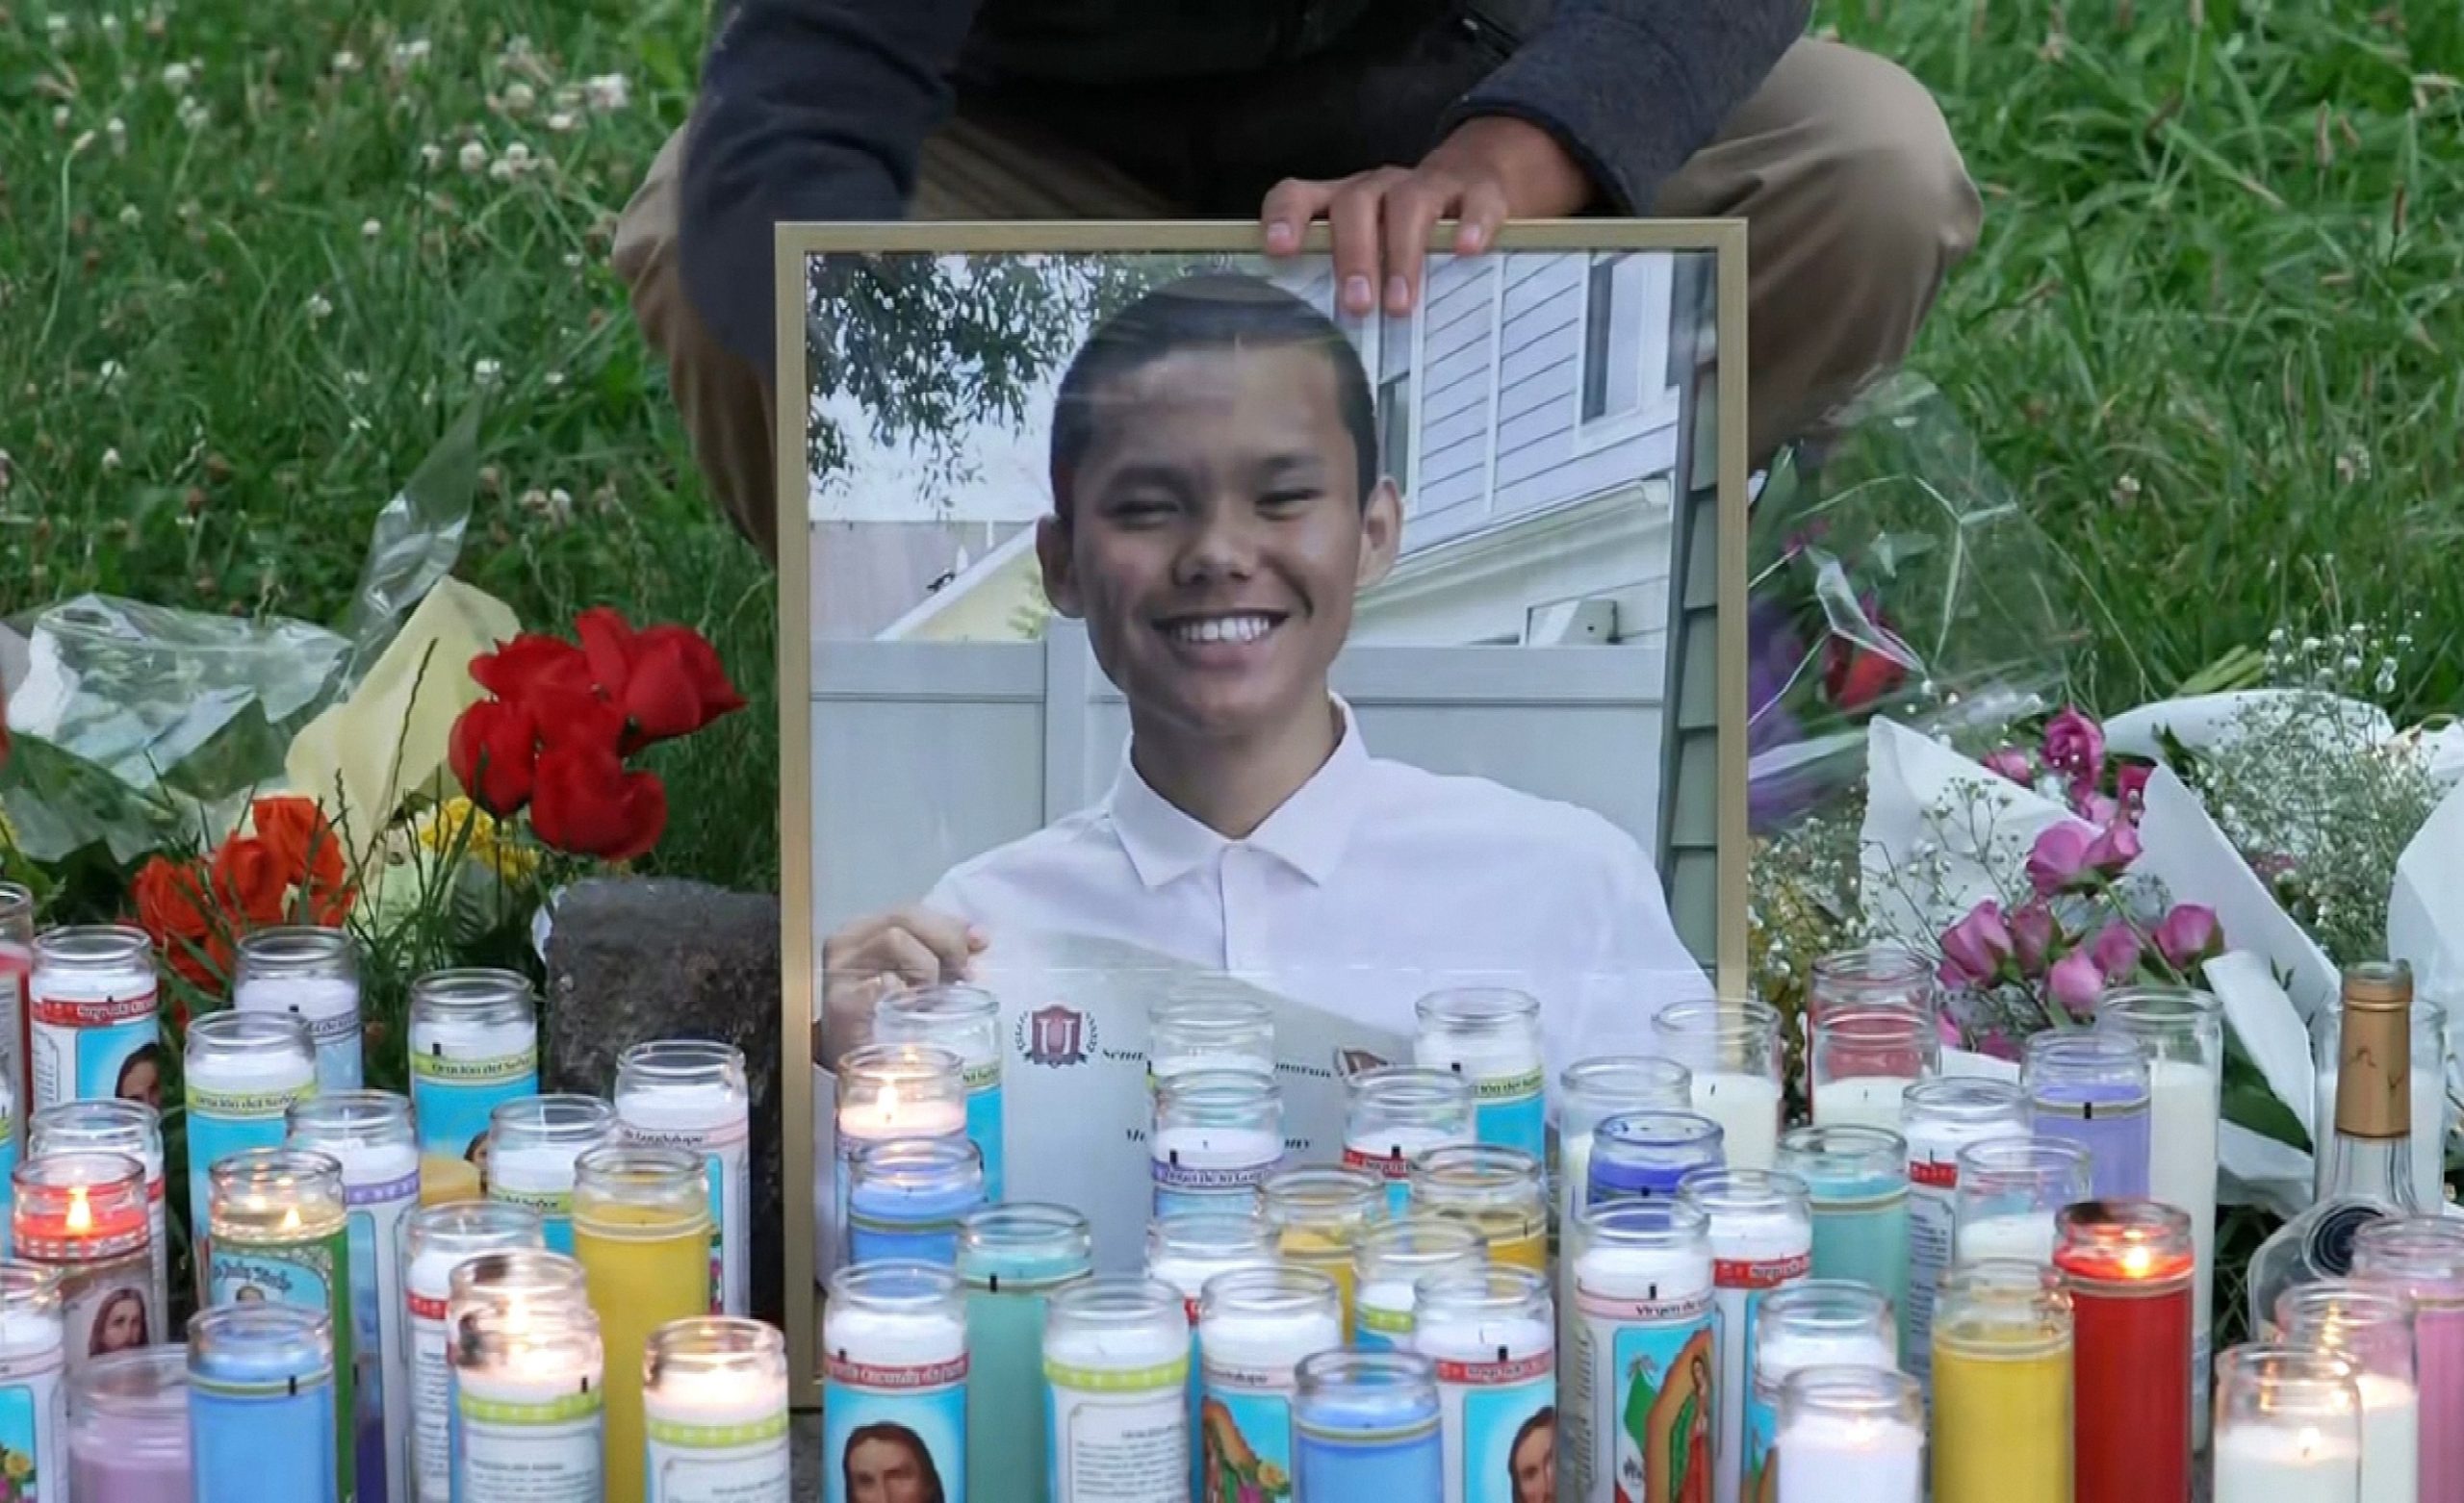 New information revealed in the case of the police shooting of a 13-year-old boy in New York